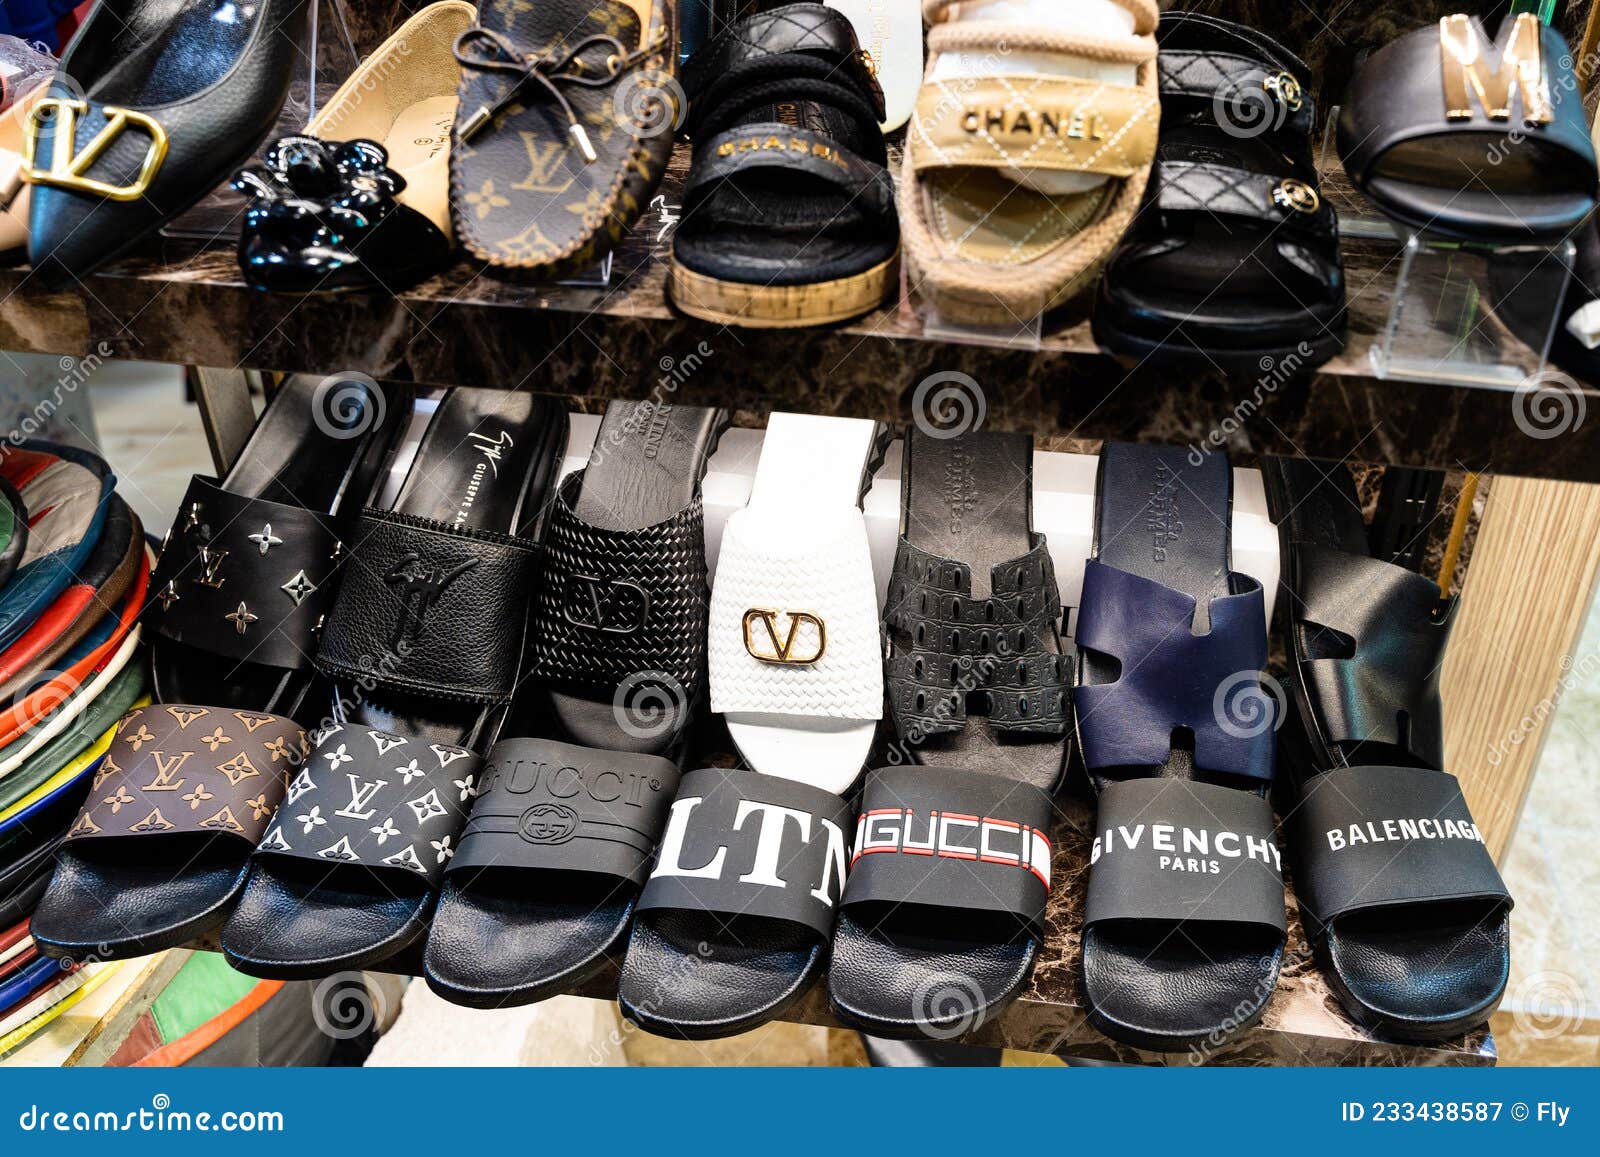 Shelf with Counterfeit Fake Shoe Brands in Istanbul Bazaar Editorial ...